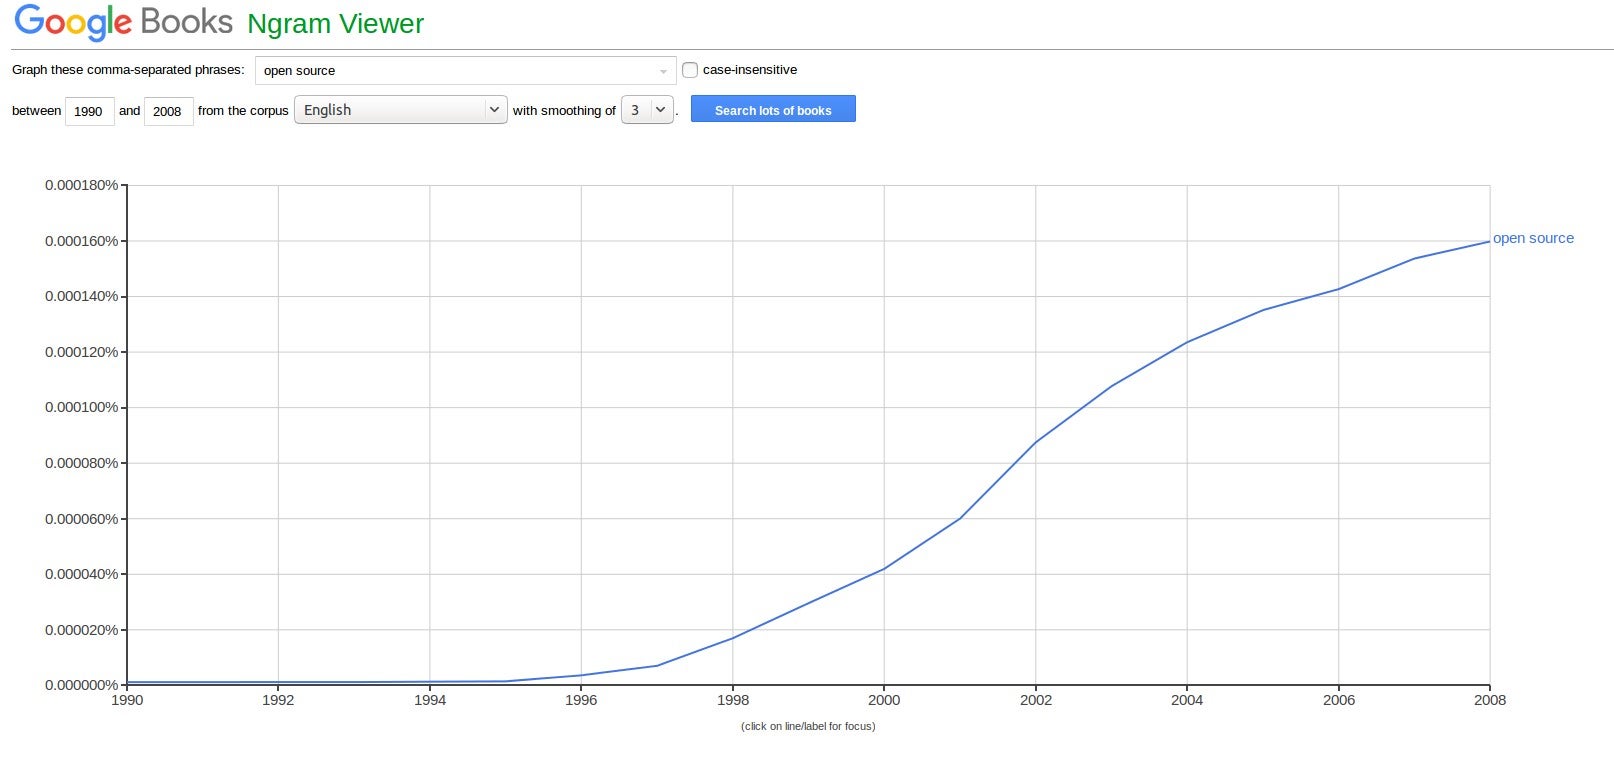 Google Books Ngram viewer trend for open source